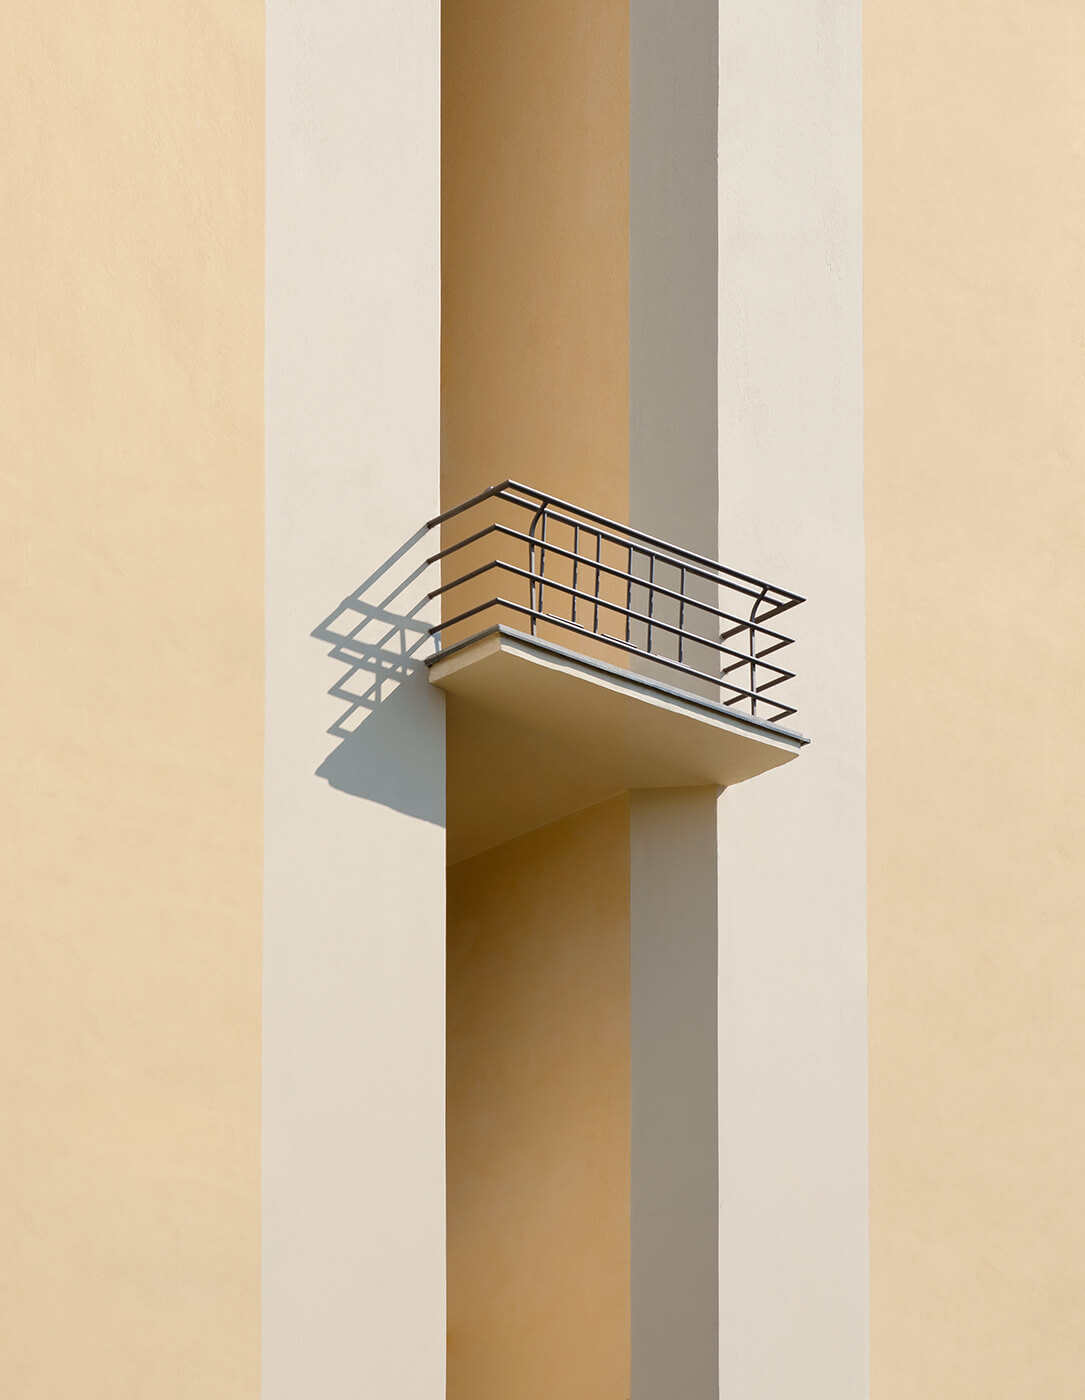 A minimalistic architectural image of a balcony in a yellow building